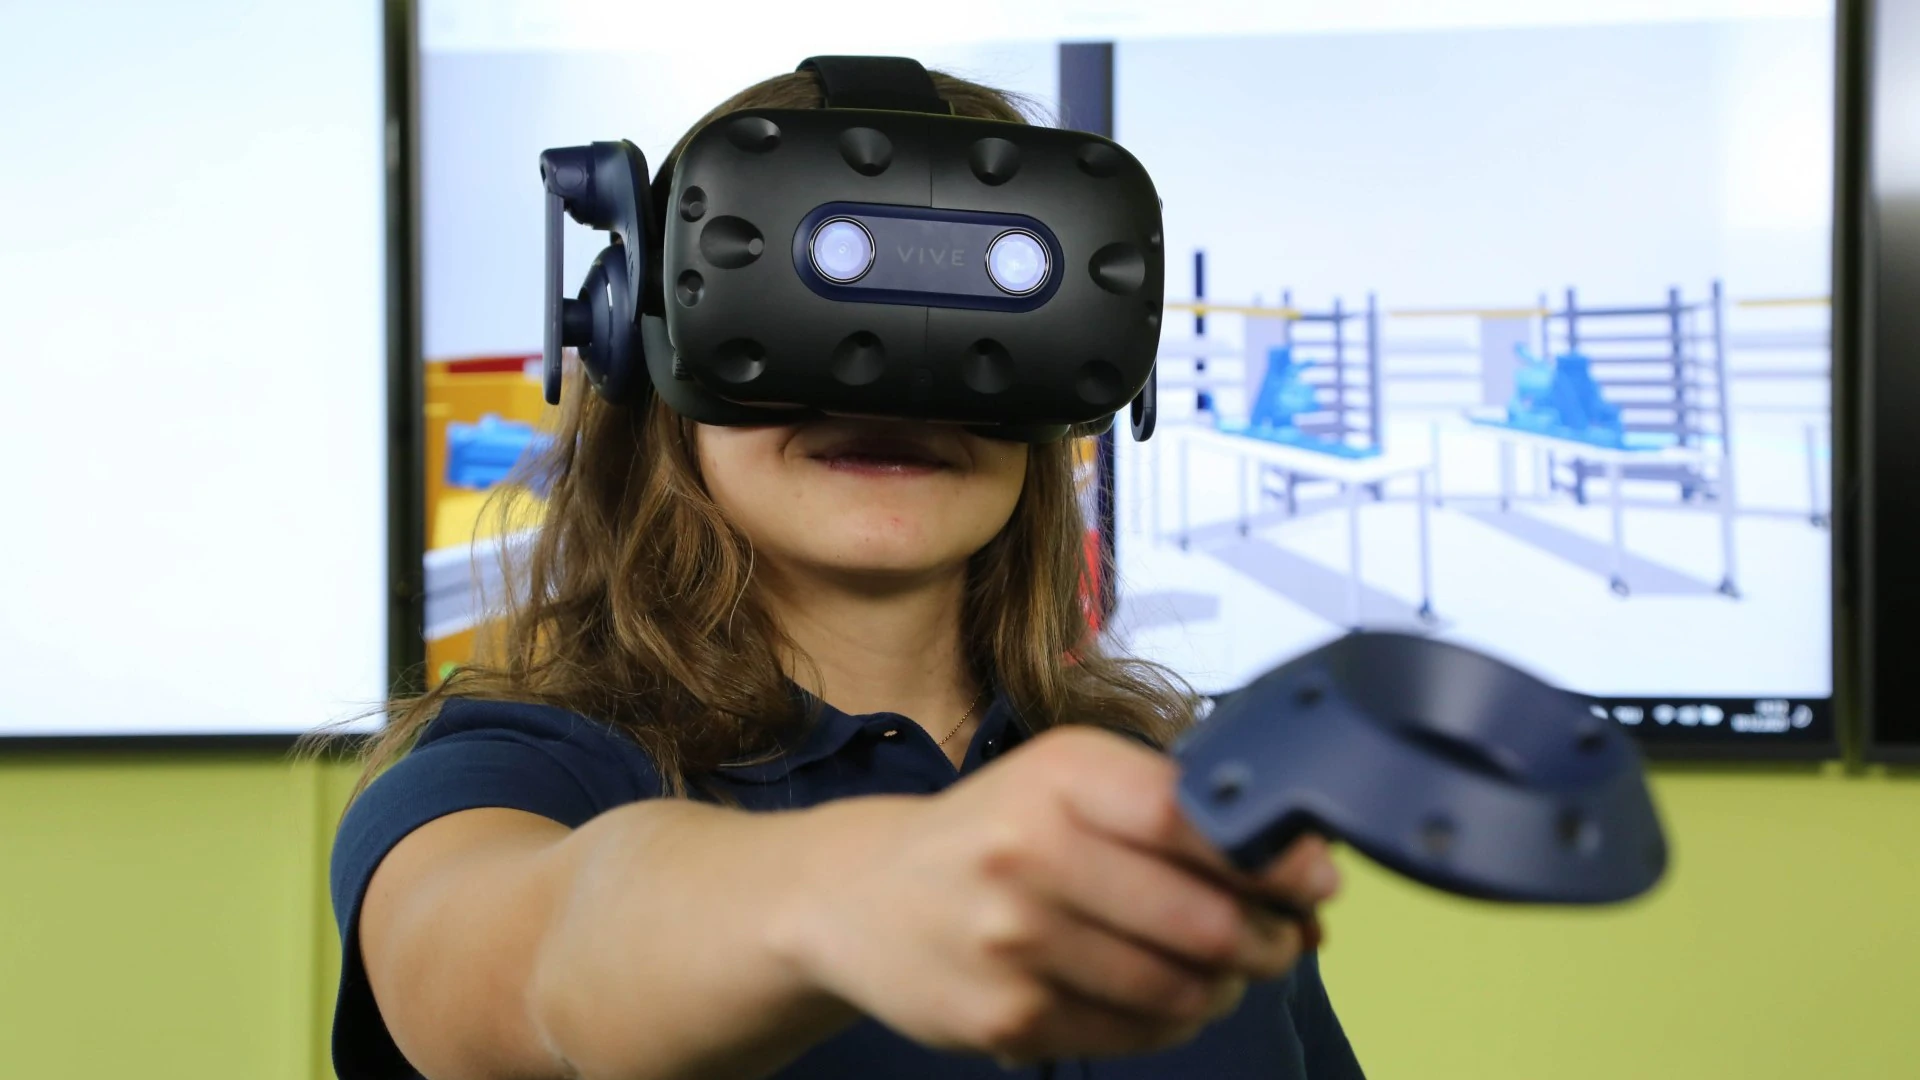 Smart technologies can be used not only in the operation of the smart factory, but also in its planning. We will introduce you to possibilities such as efficient layout planning with virtual reality.